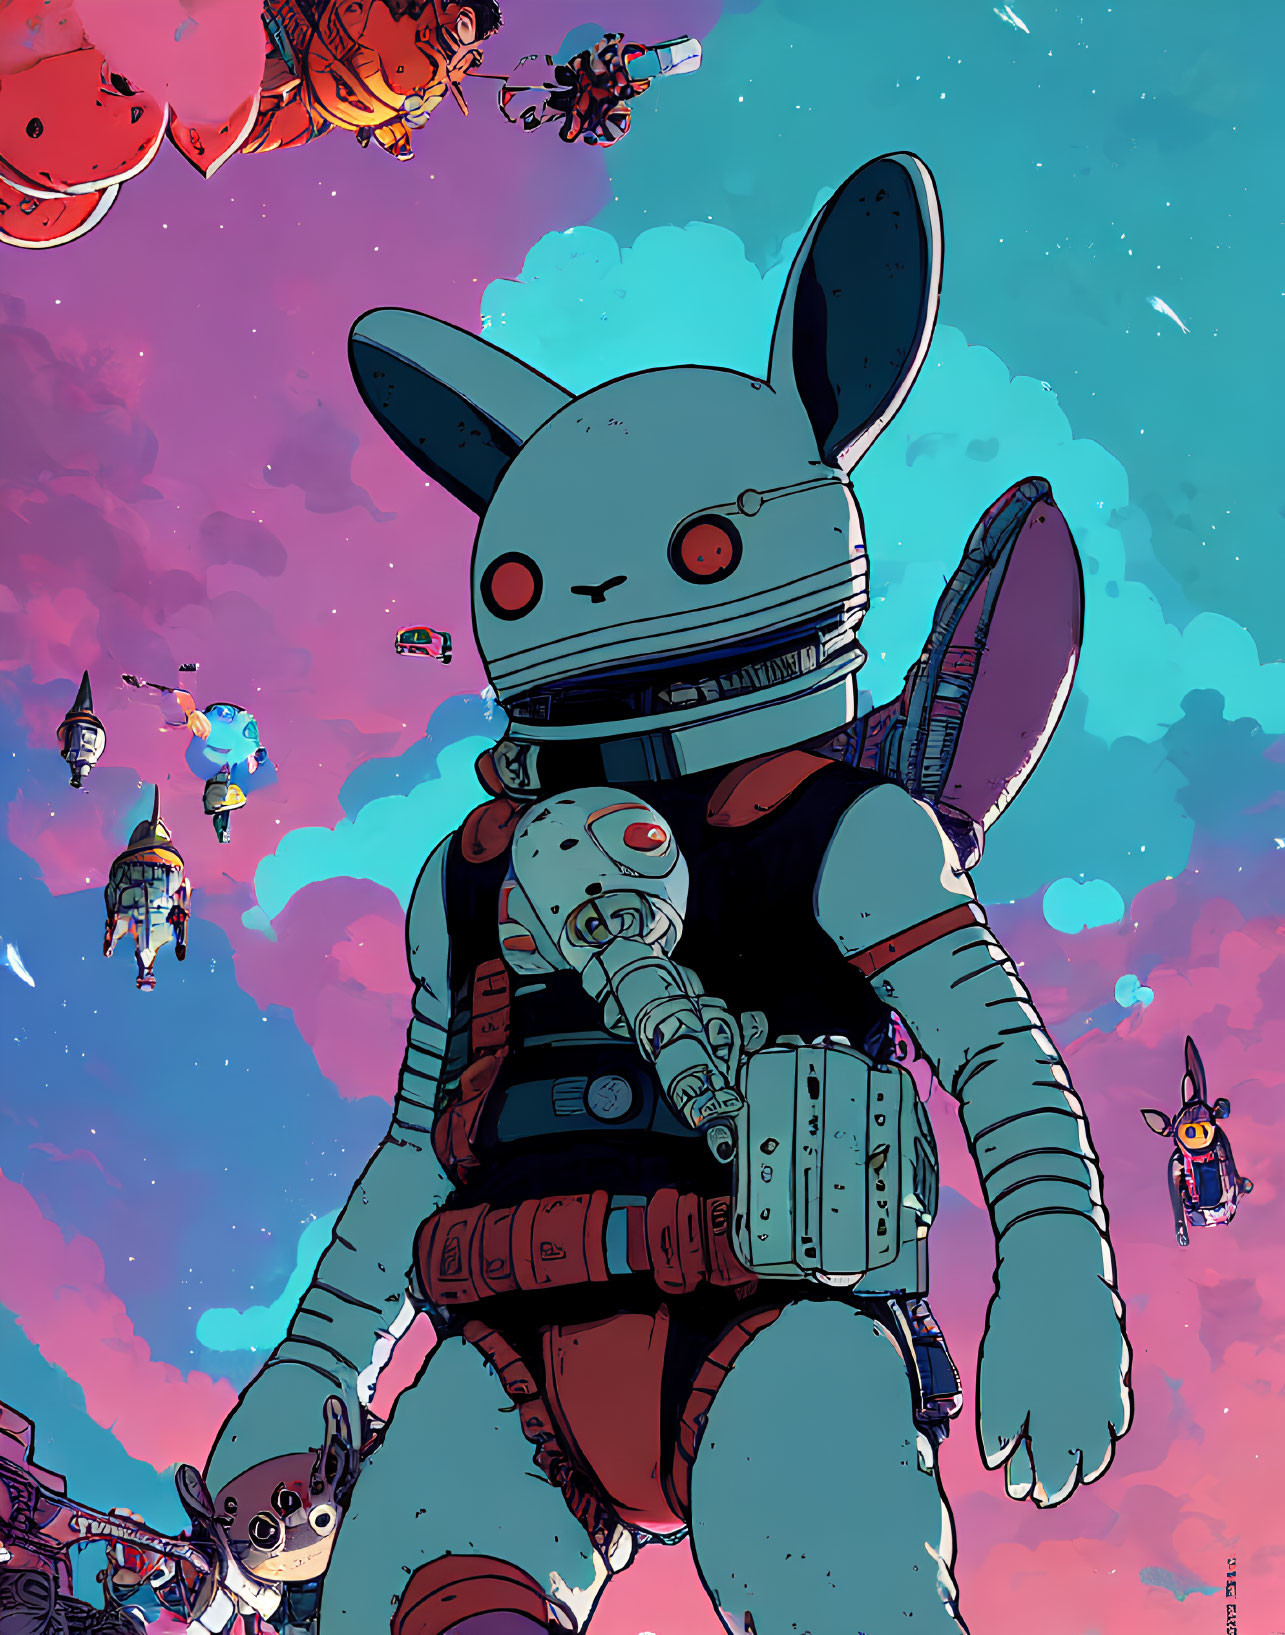 Colorful Rabbit Astronaut Surrounded by Floating Characters in Space